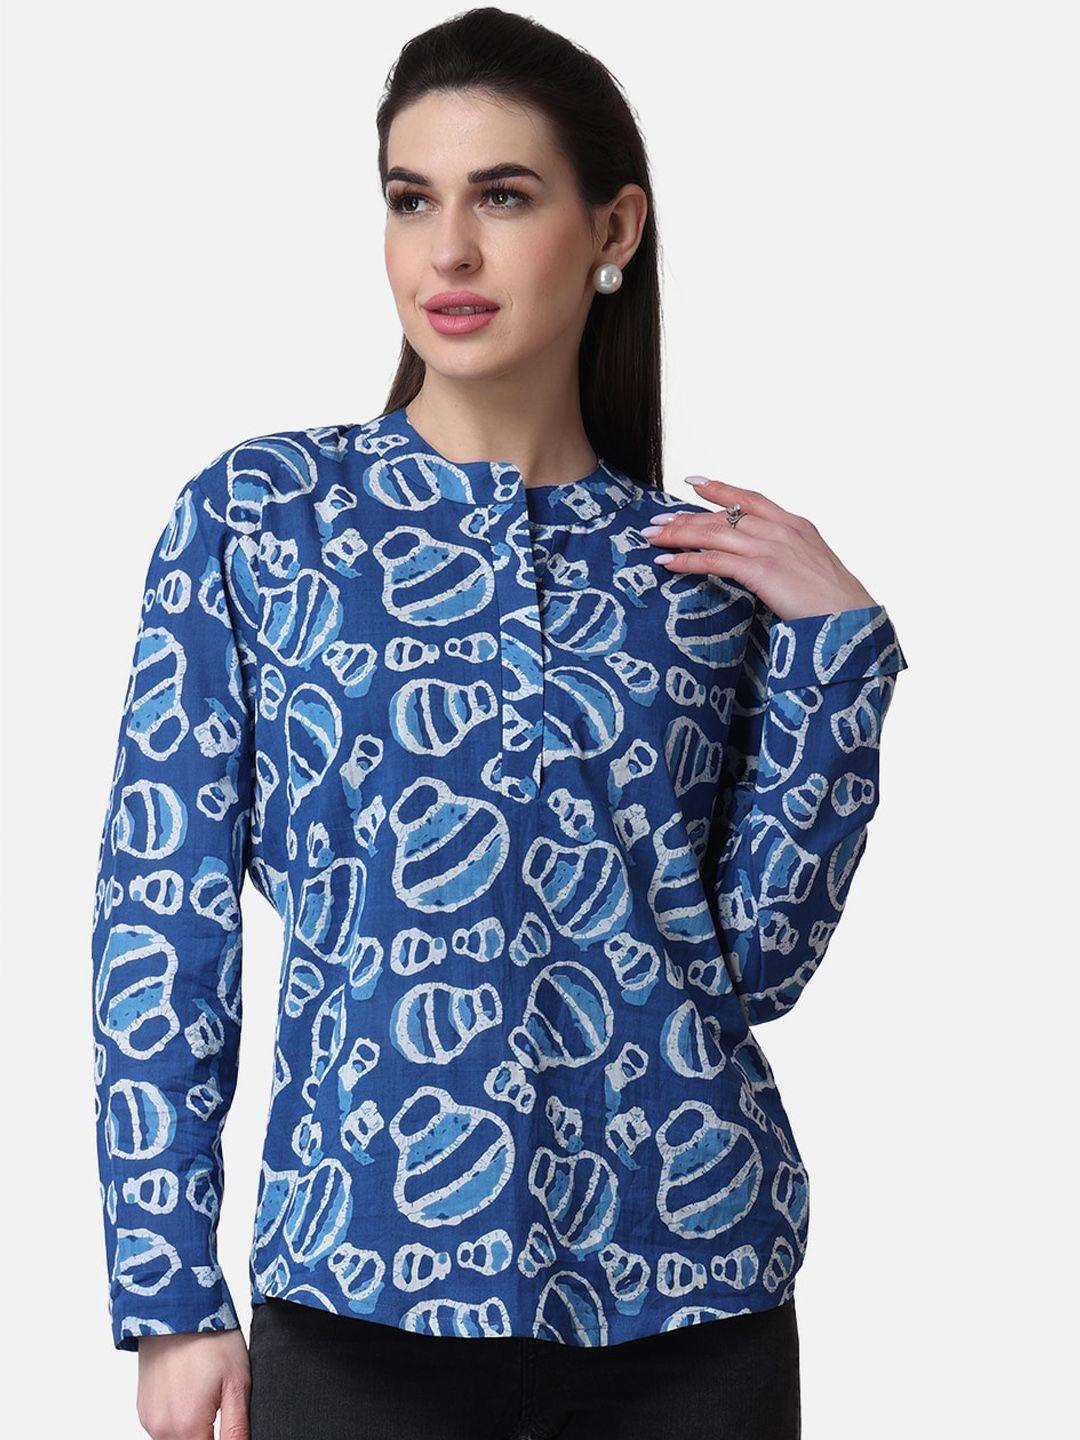 popwings-ethnic-motifs-printed-pure-cotton-shirt-style-top